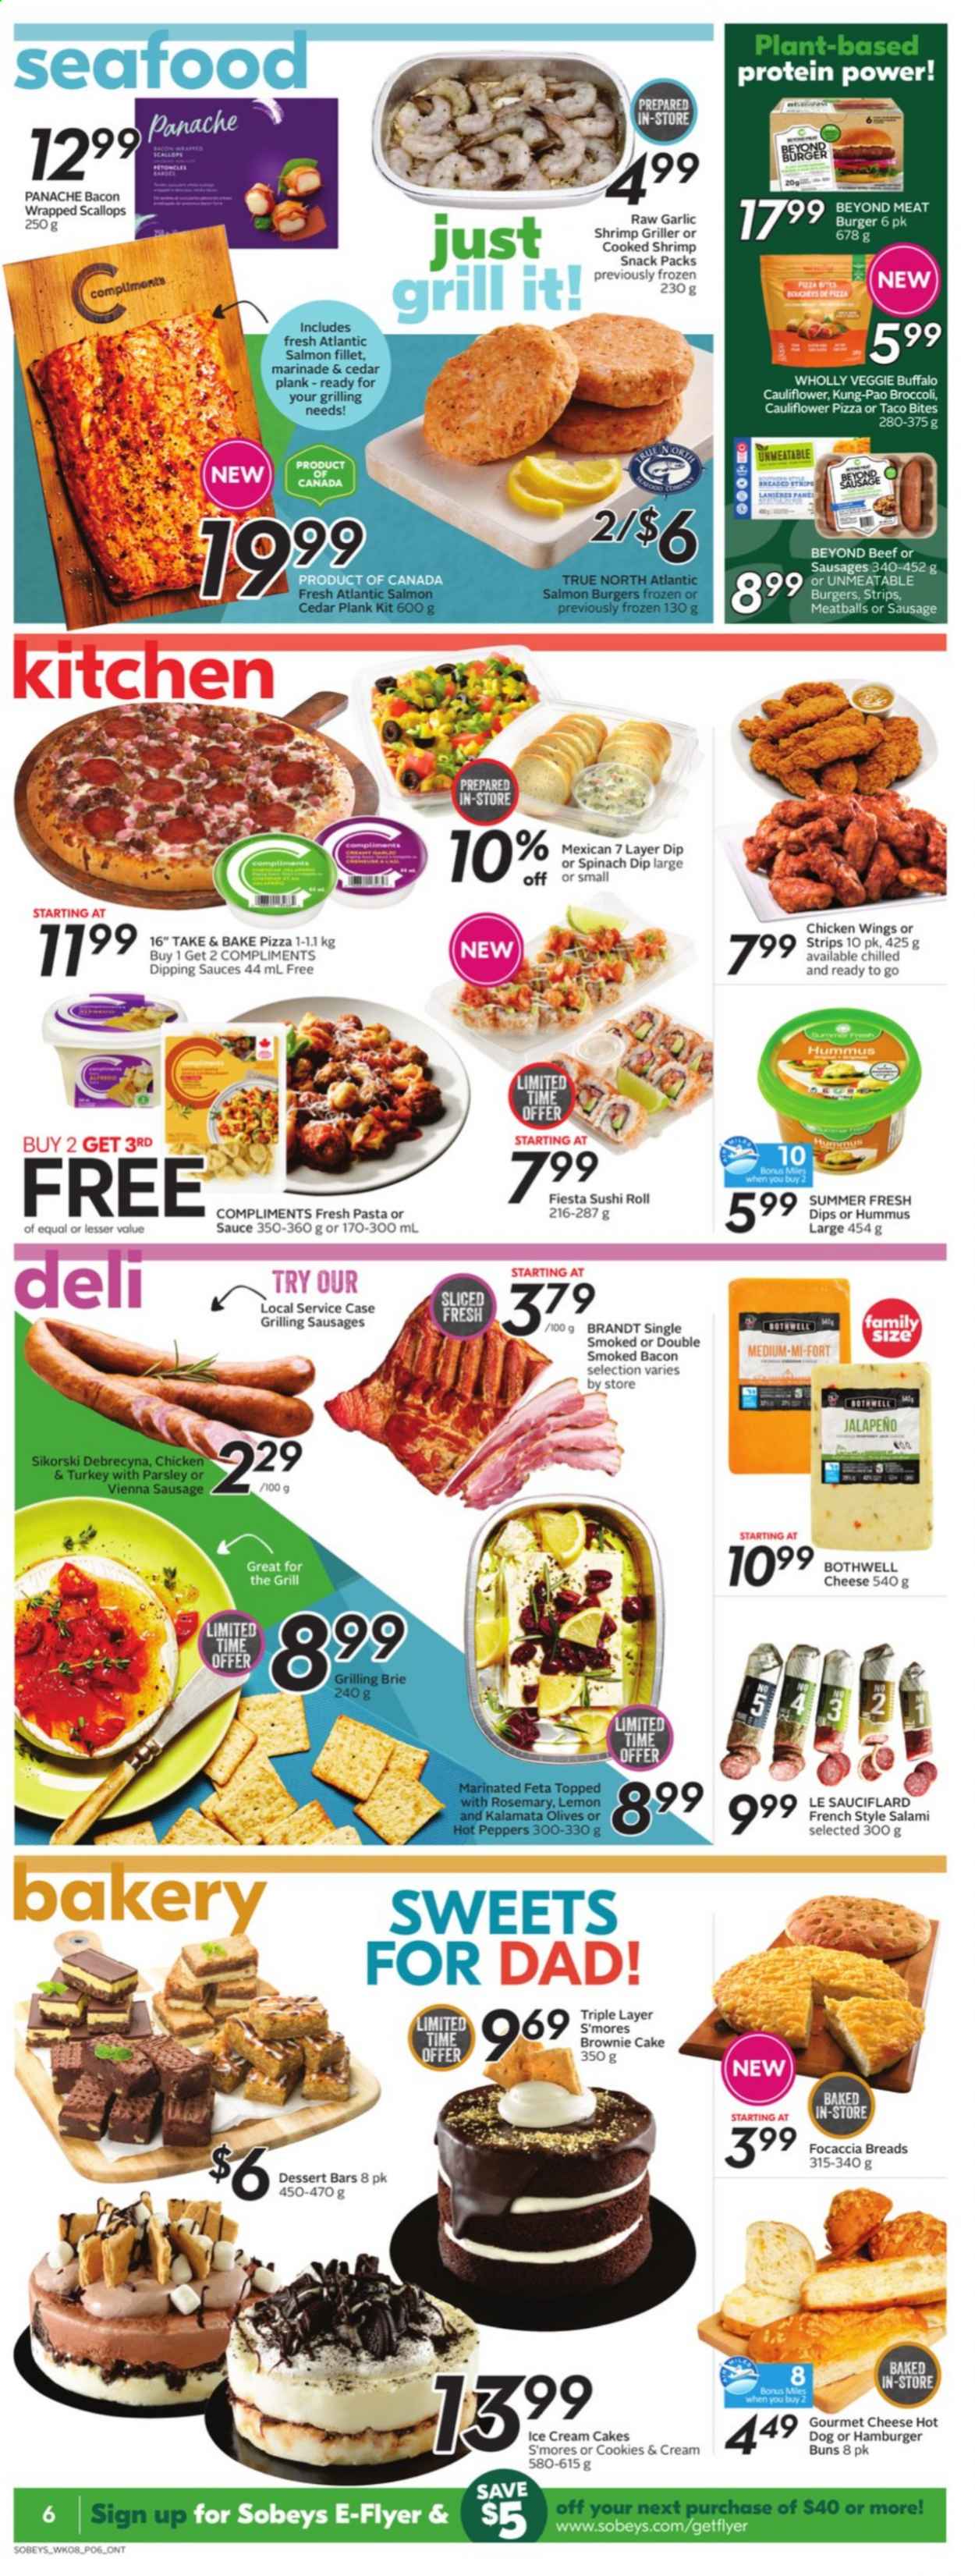 thumbnail - Sobeys Flyer - June 17, 2021 - June 23, 2021 - Sales products - cake, burger buns, focaccia, brownies, broccoli, garlic, parsley, peppers, jalapeño, bacon wrapped scallops, salmon, salmon fillet, scallops, seafood, shrimps, pizza, meatballs, bacon, salami, sausage, vienna sausage, hummus, brie, feta, dip, spinach dip, ice cream, chicken wings, strips, cookies, snack, rosemary, marinade, olives. Page 6.